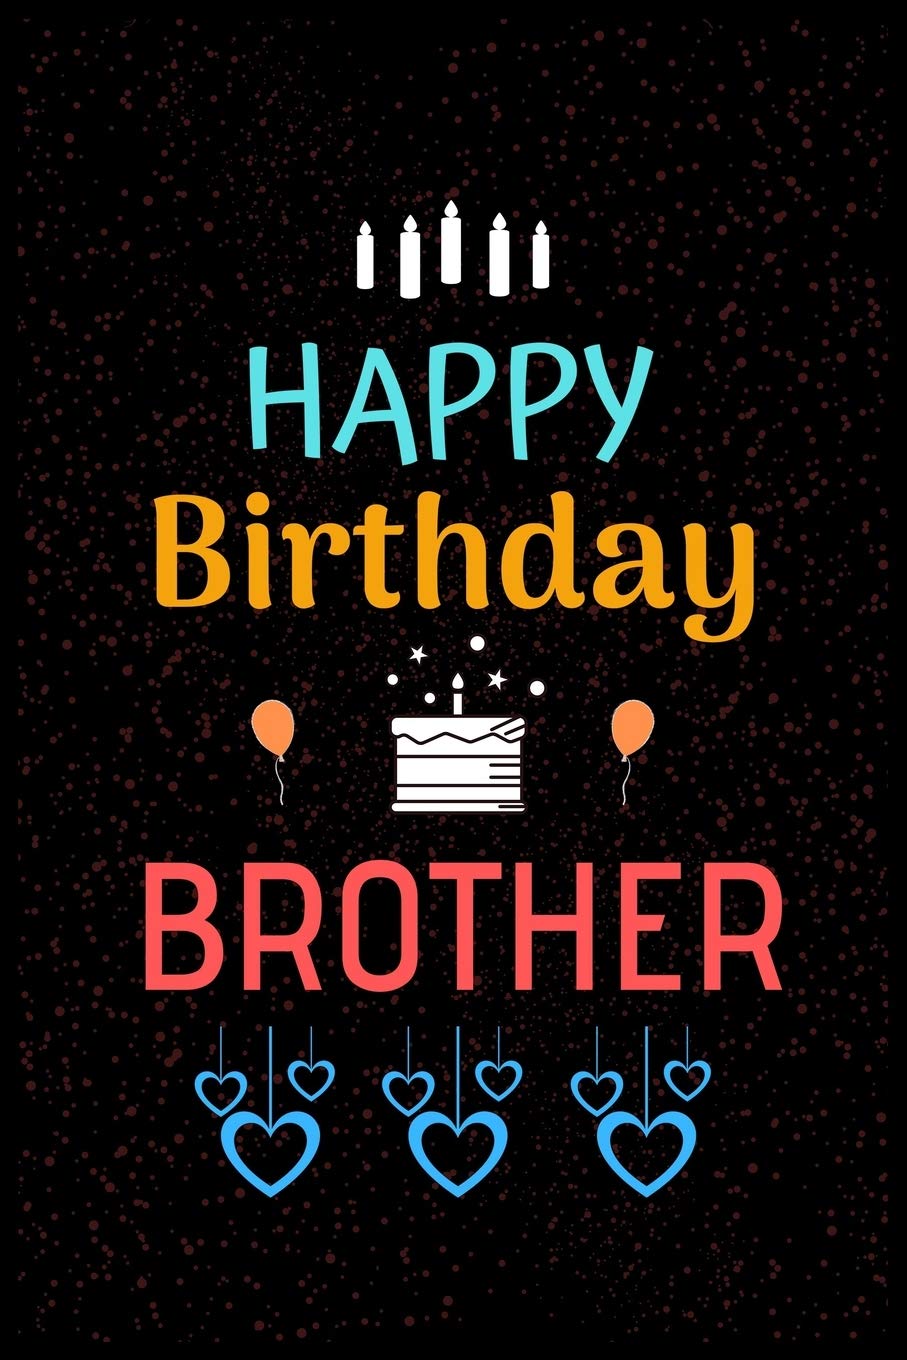 Buy happy birthday brother happy birthday brother notebook sketchbook journal for brother friends pages x unique birthday diary birthday gift book onle at low prices dia